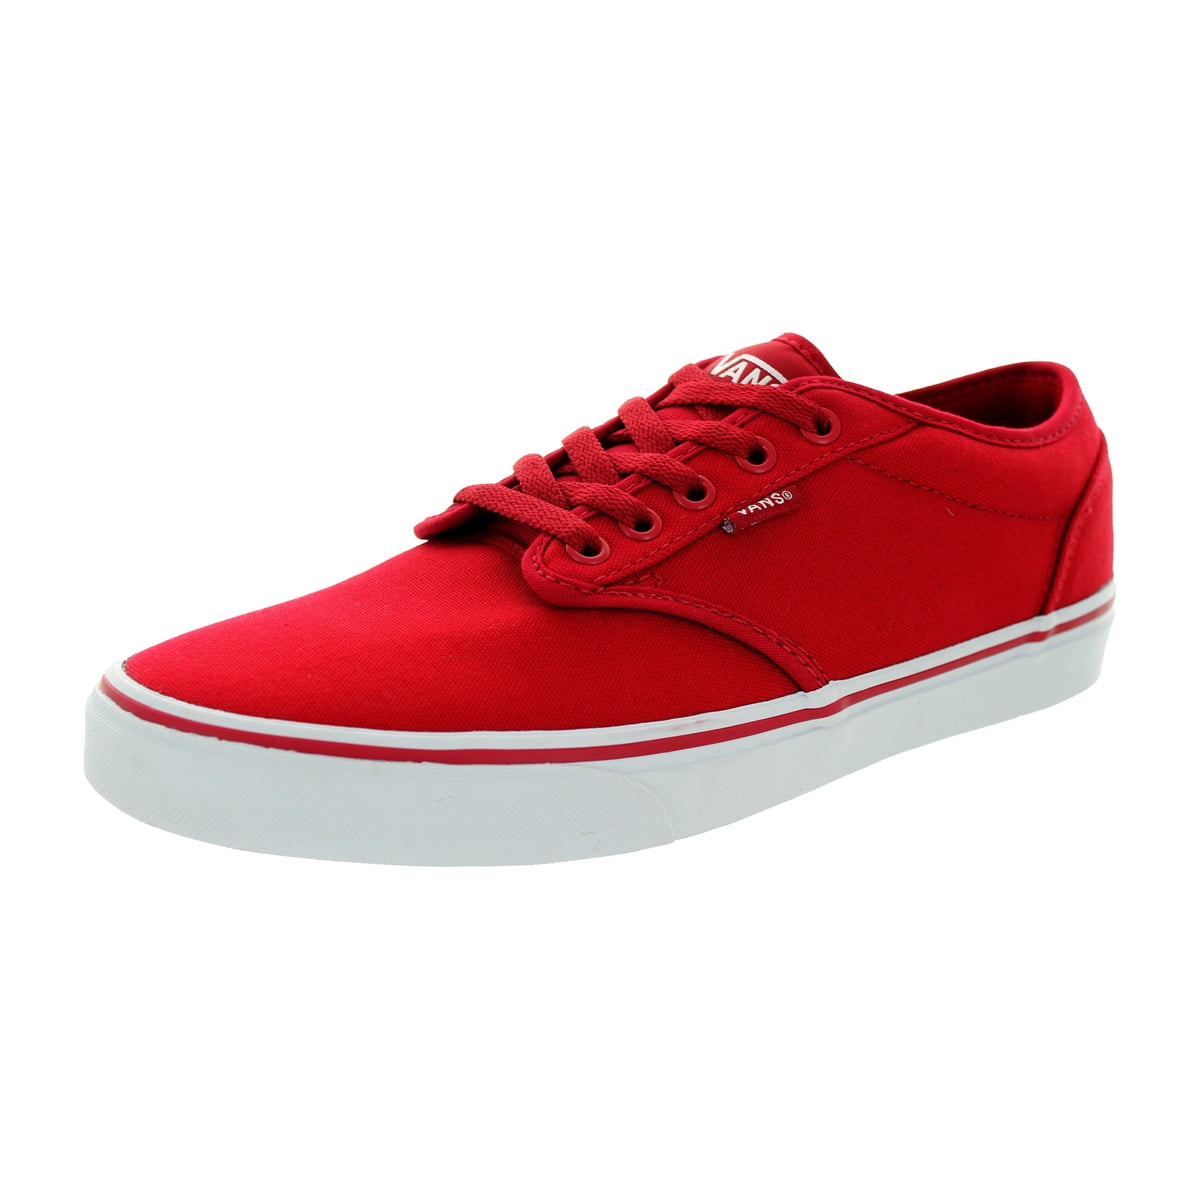 Vans Men's Atwood Red Canvas Shoes -